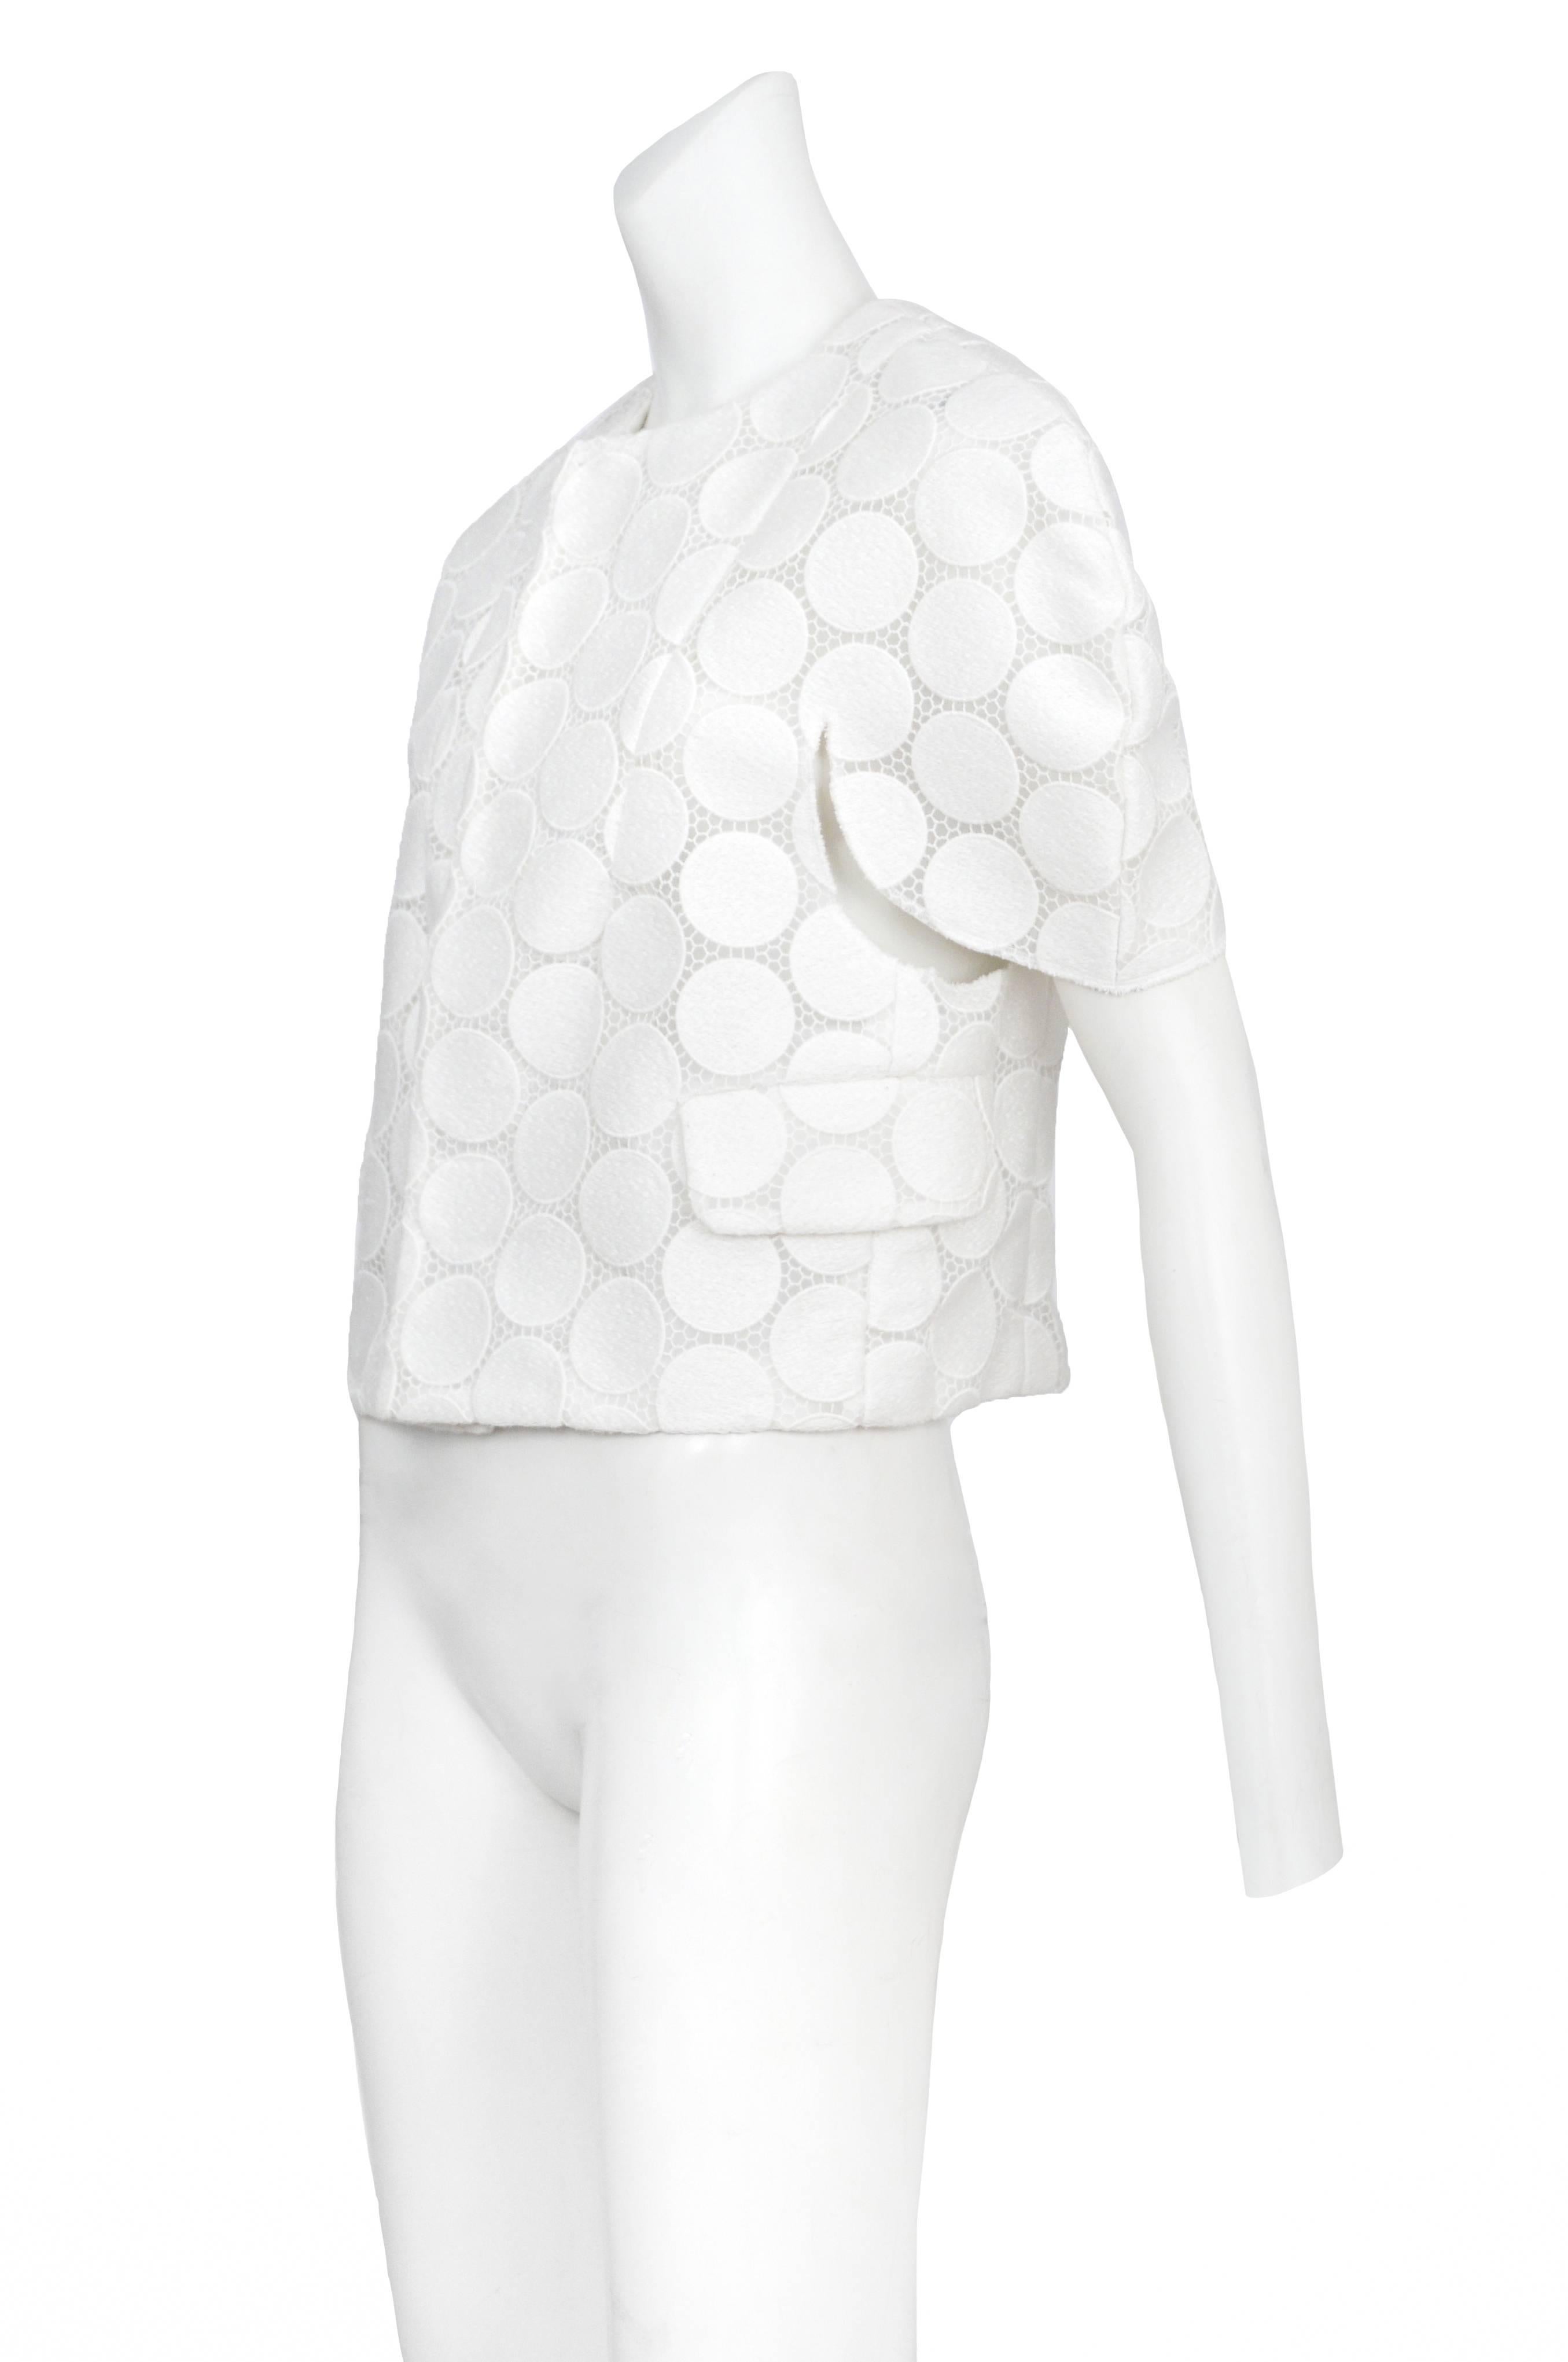 Vintage Comme des Garcons white embroidered lace polka dot short sleeve jacket featuring side pockets, front darts and cut out arm holes.